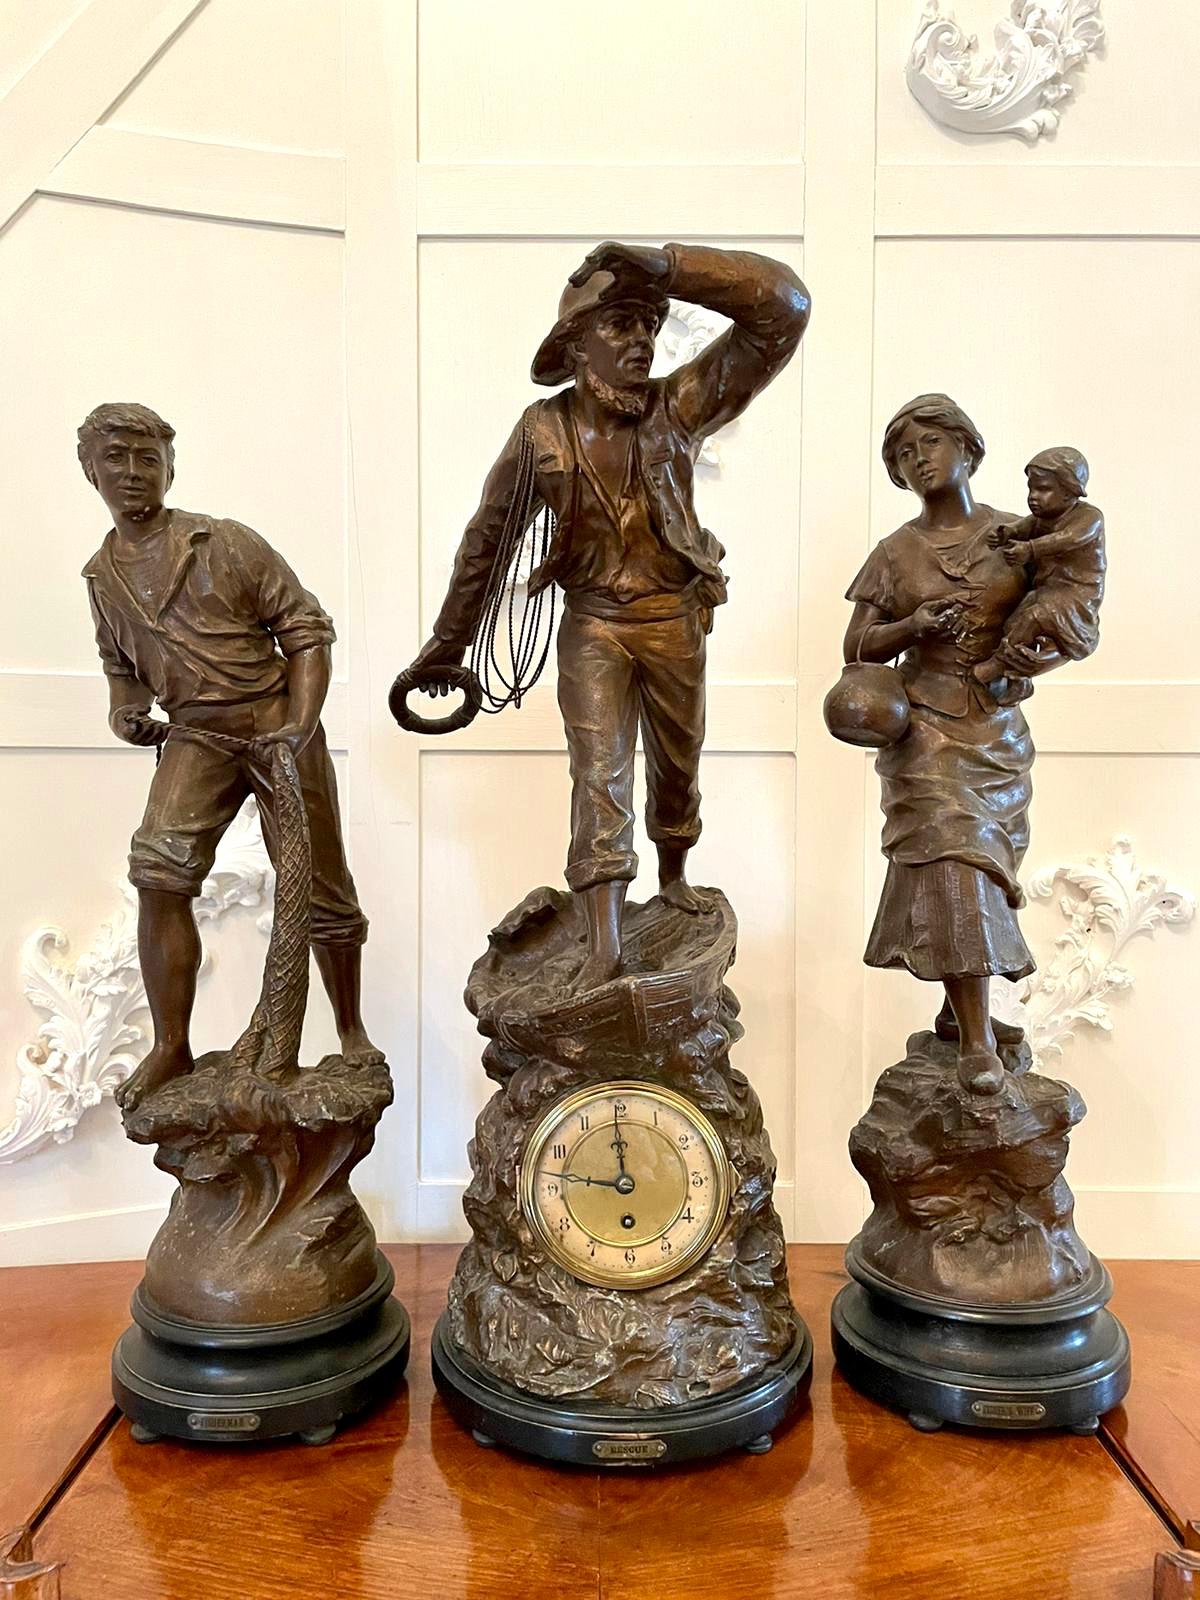 19th century fine antique large French three piece clock set having a fisherman in period dress standing in a boat and looking out to sea supported by a round wooden plinth on top of an eight day French movement with an impressive brass face,